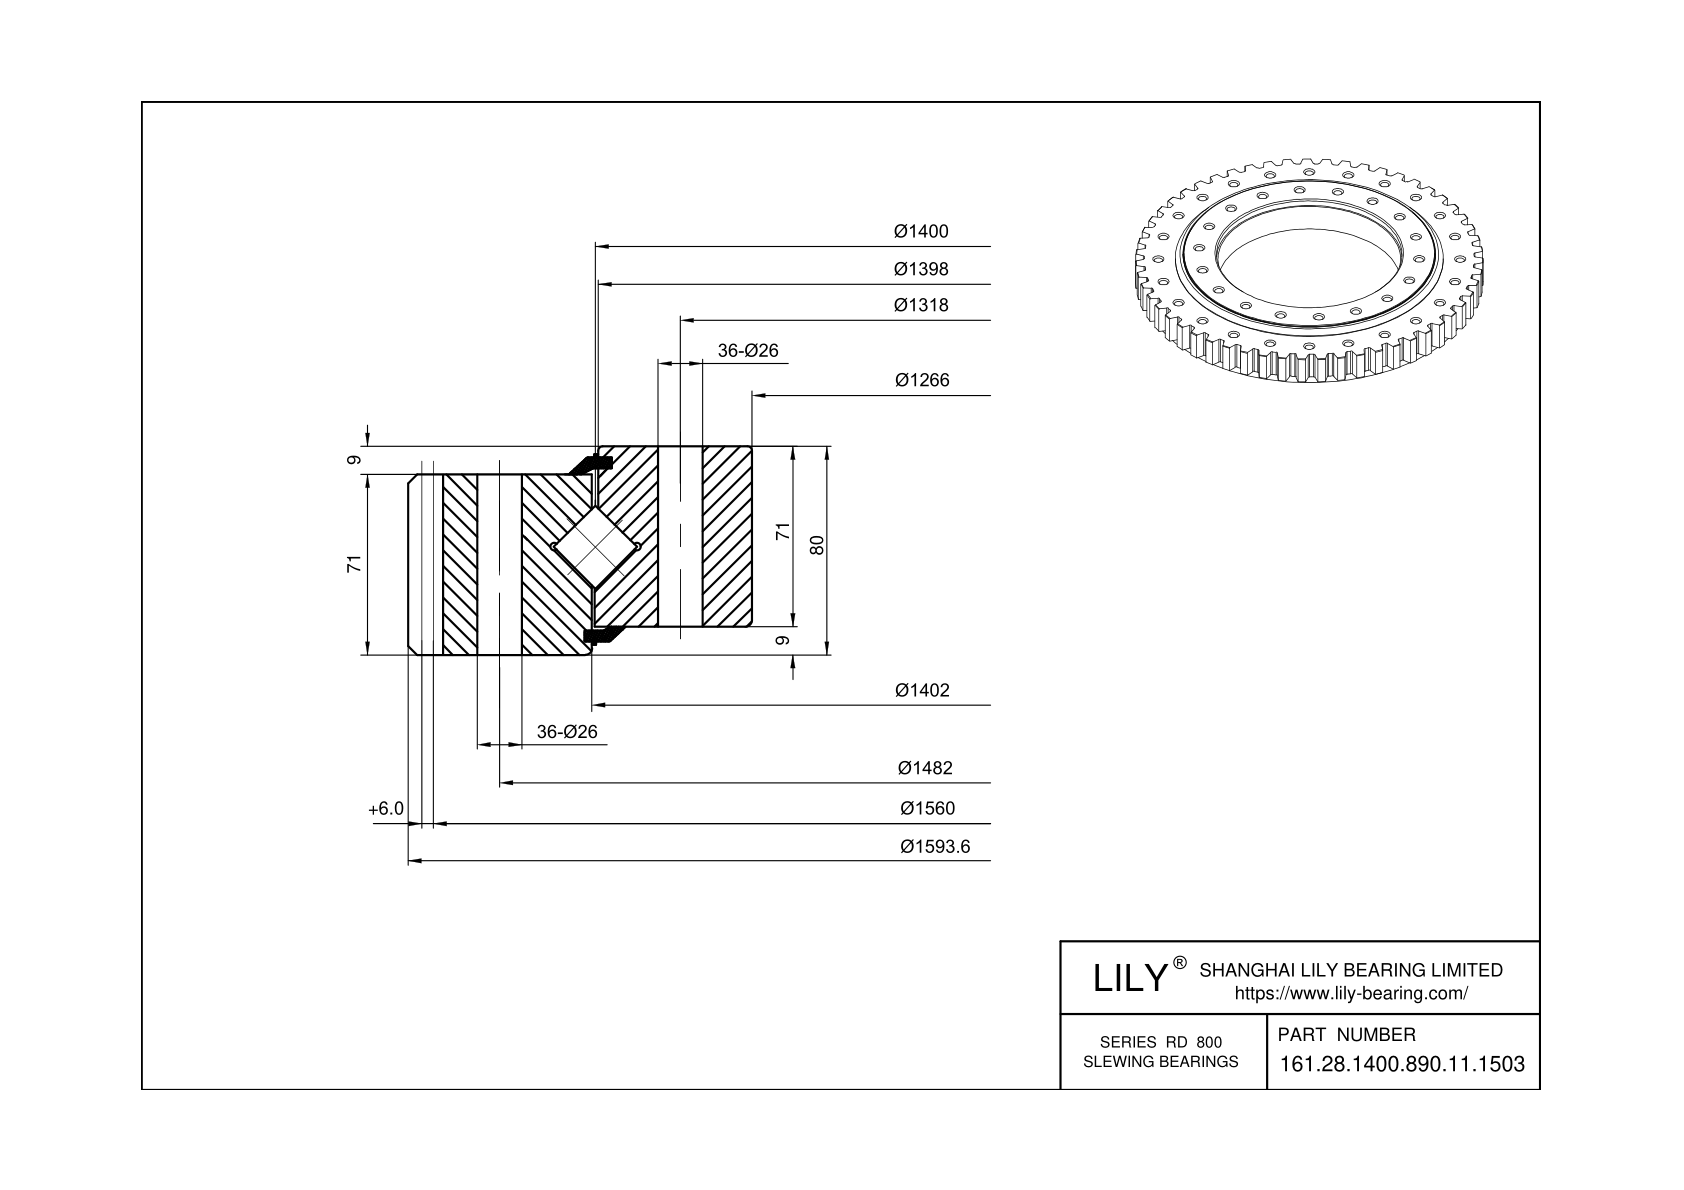 161.28.1400.890.11.1503 Cross Roller Slewing Ring Bearing cad drawing